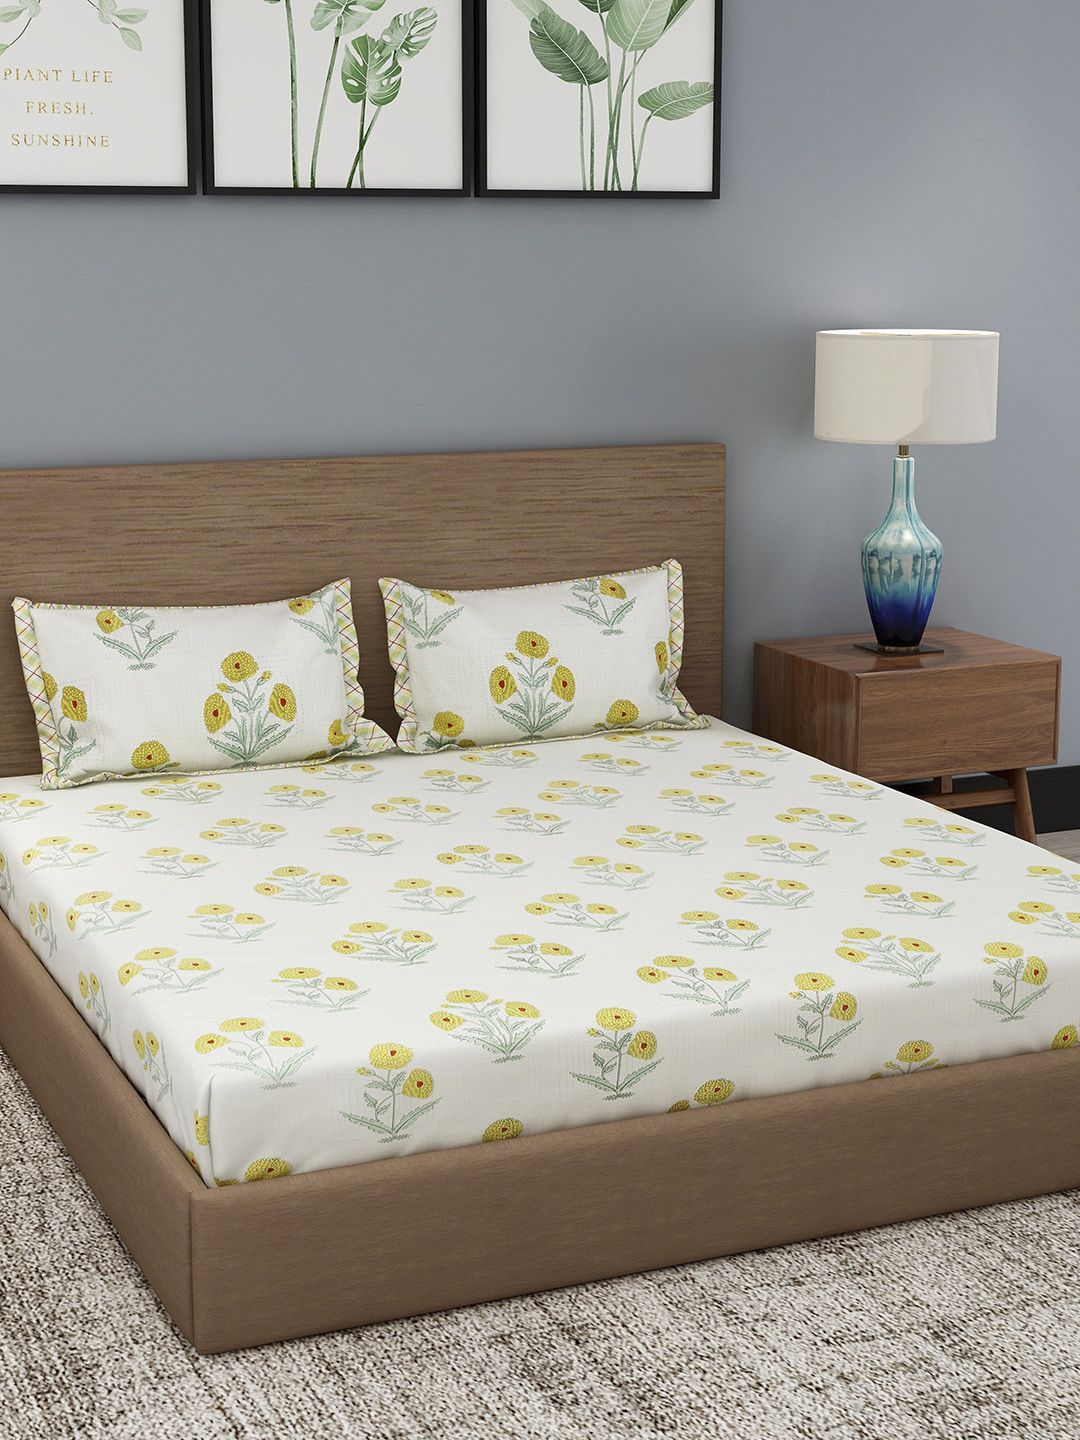 Rajasthan Decor Cream-Coloured & Yellow Floral 180 TC Cotton 1 King Bedsheet with 2 Pillow Covers Price in India